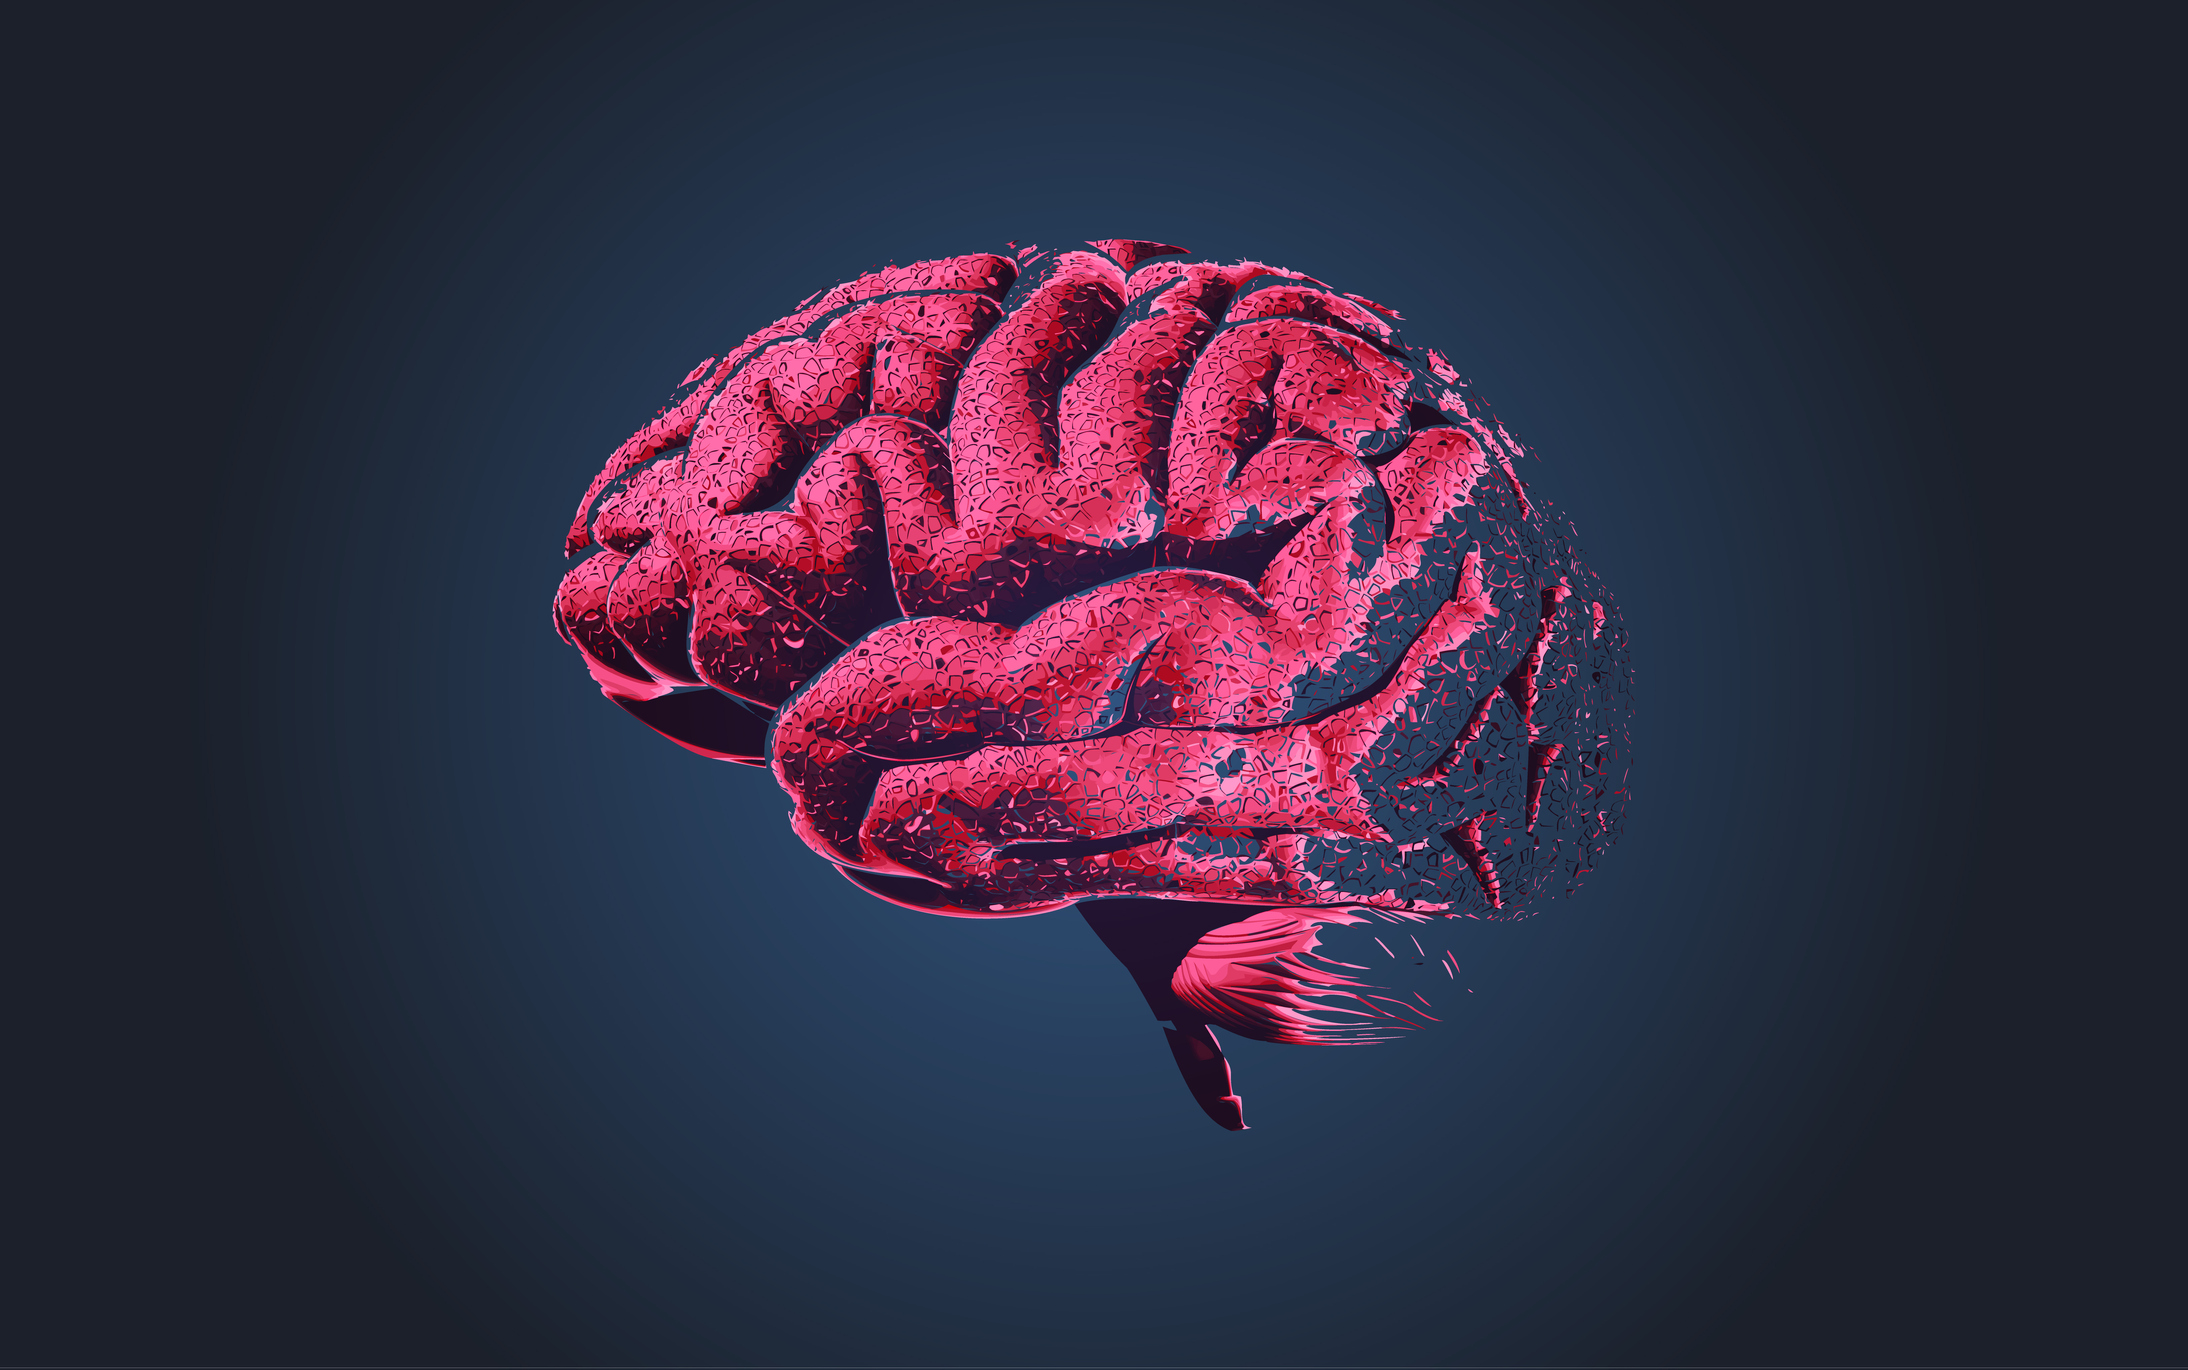 Quantified: How much type 2 diabetes ages the brain